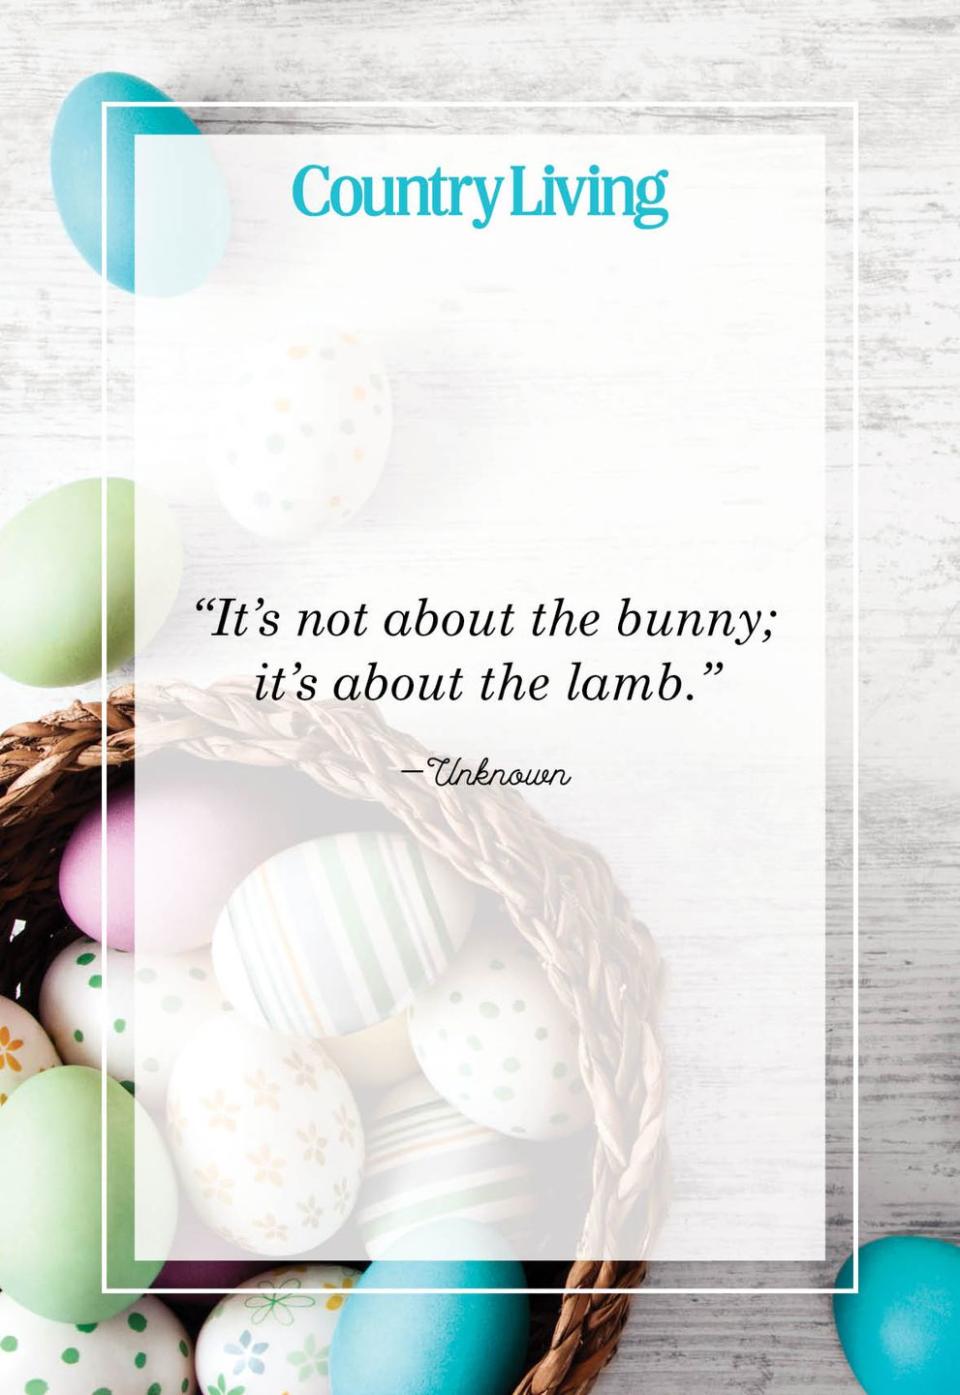 <p>"It's not about the bunny; it's about the lamb."</p>